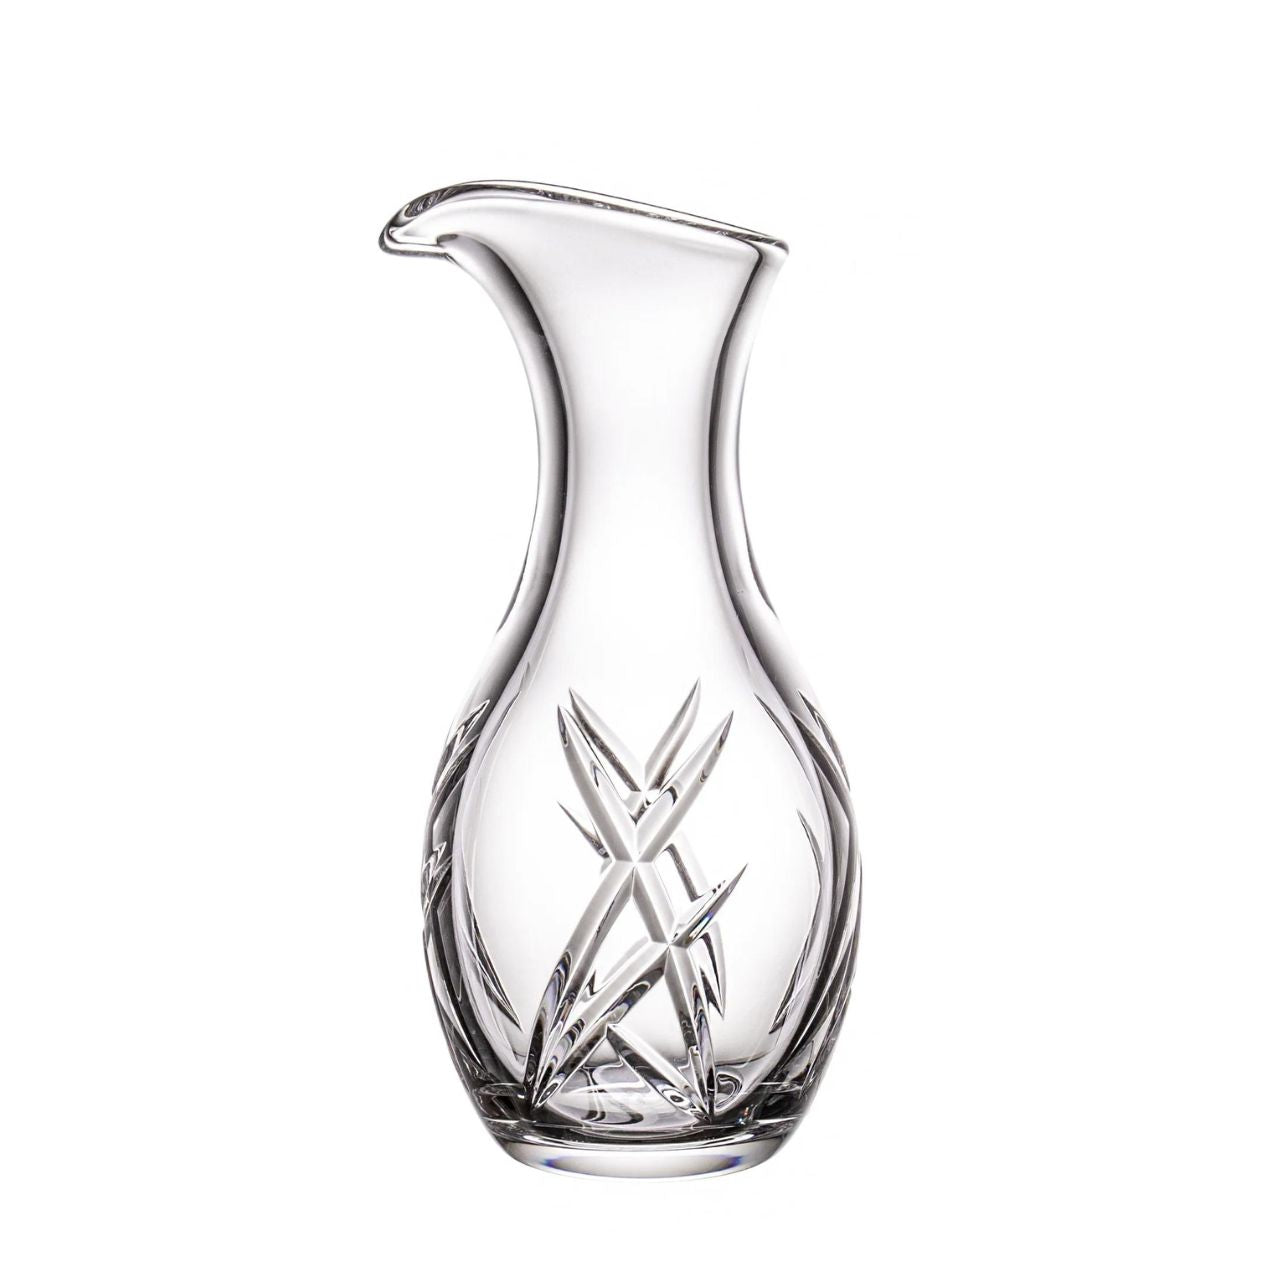 John Rocha Signature Carafe by Waterford Crystal   John Rocha captures the clarity and purity of Waterford Crystal with his contemporary collection of stemware. Whether decanting wine or serving ice-cold water, the John Rocha Signature Carafe makes a stunning statement on your dining table, showcasing the brilliant clarity of hand-crafted fine crystal combined with the comforting weight and stability expected from Waterford.